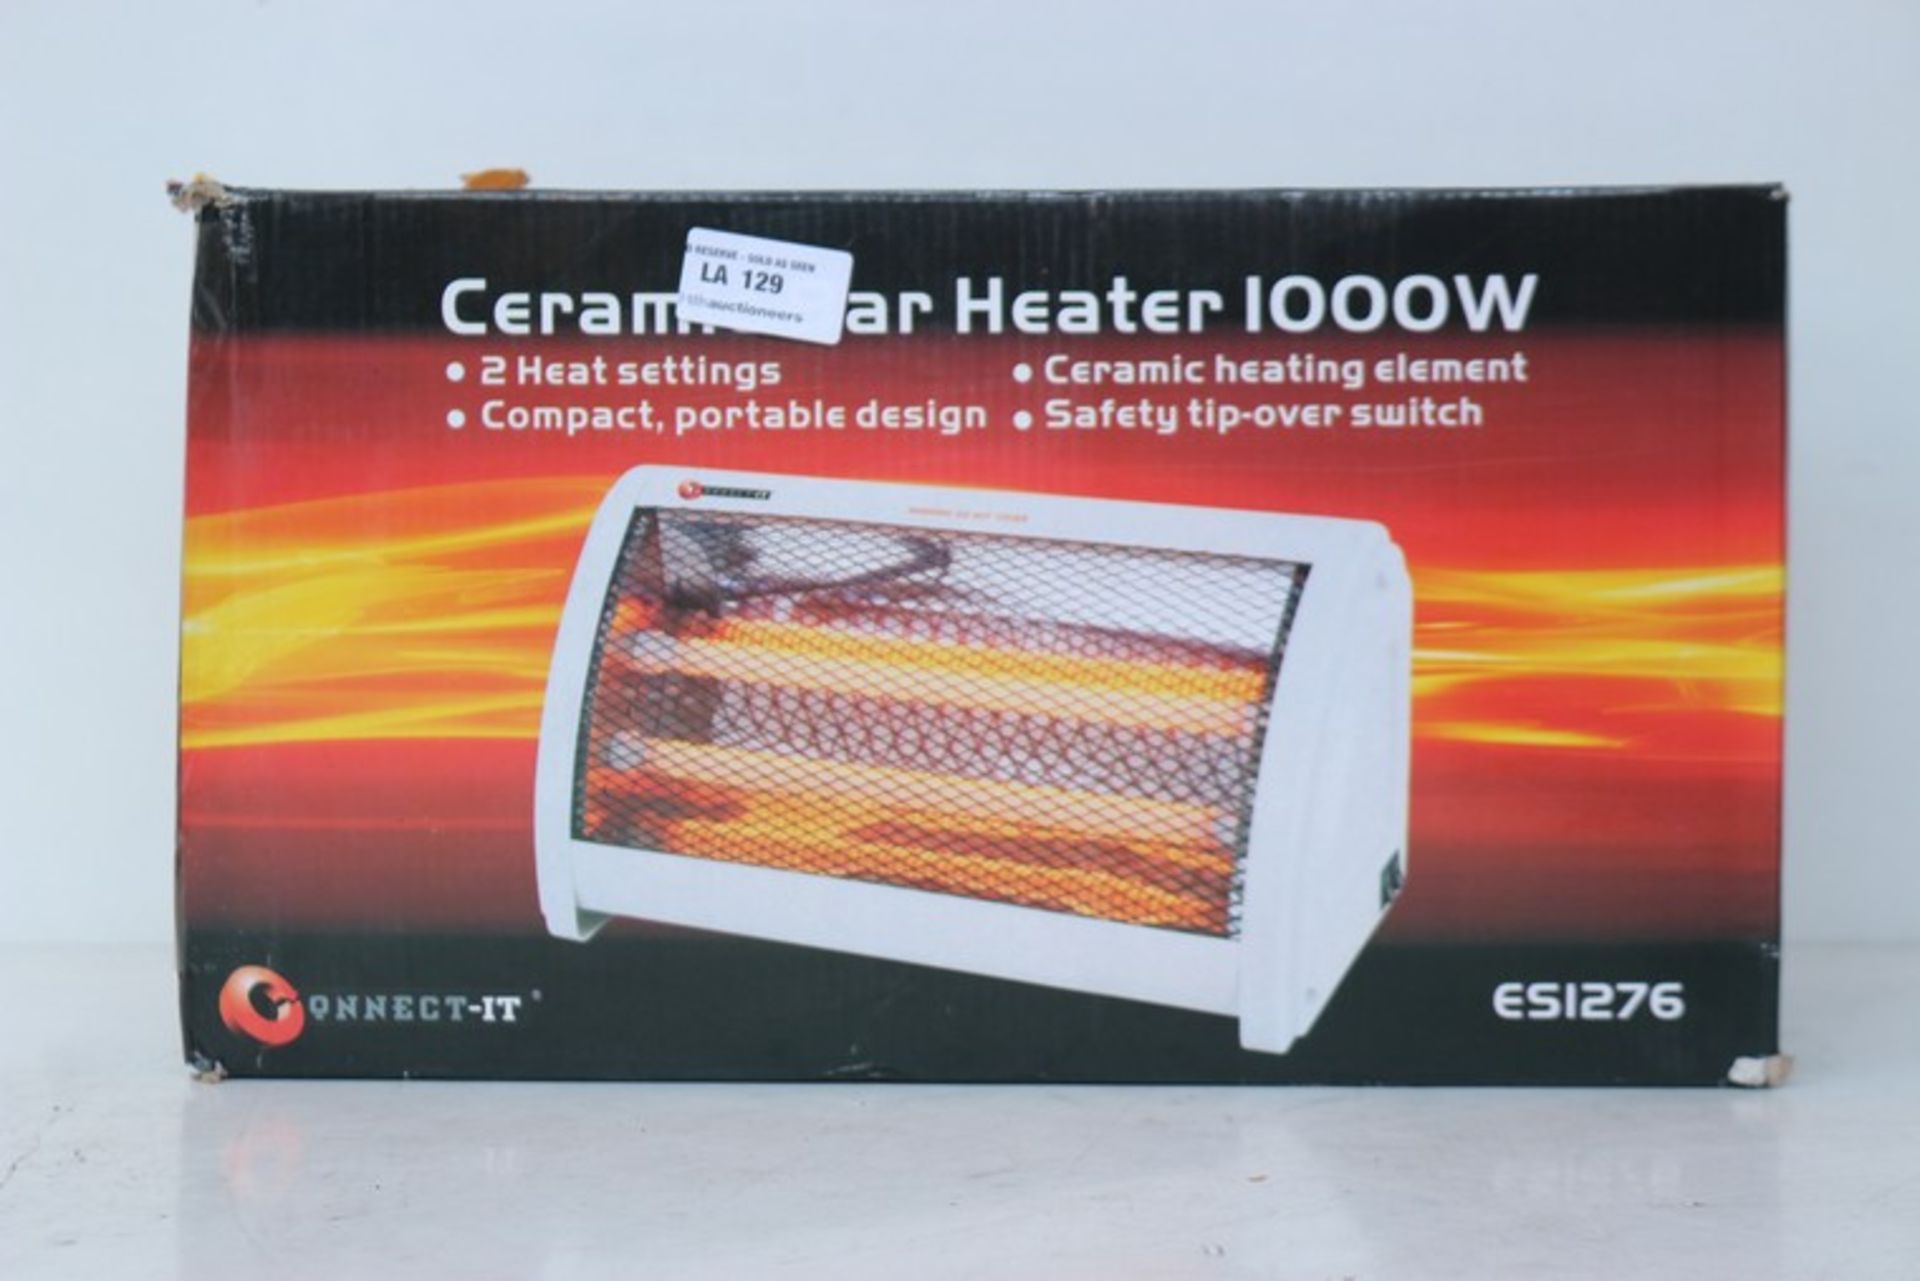 3 x BOXED CERAMIC BAR HEATERS 1000W *PLEASE NOTE THAT THE BID PRICE IS MULTIPLIED BY THE NUMBER OF